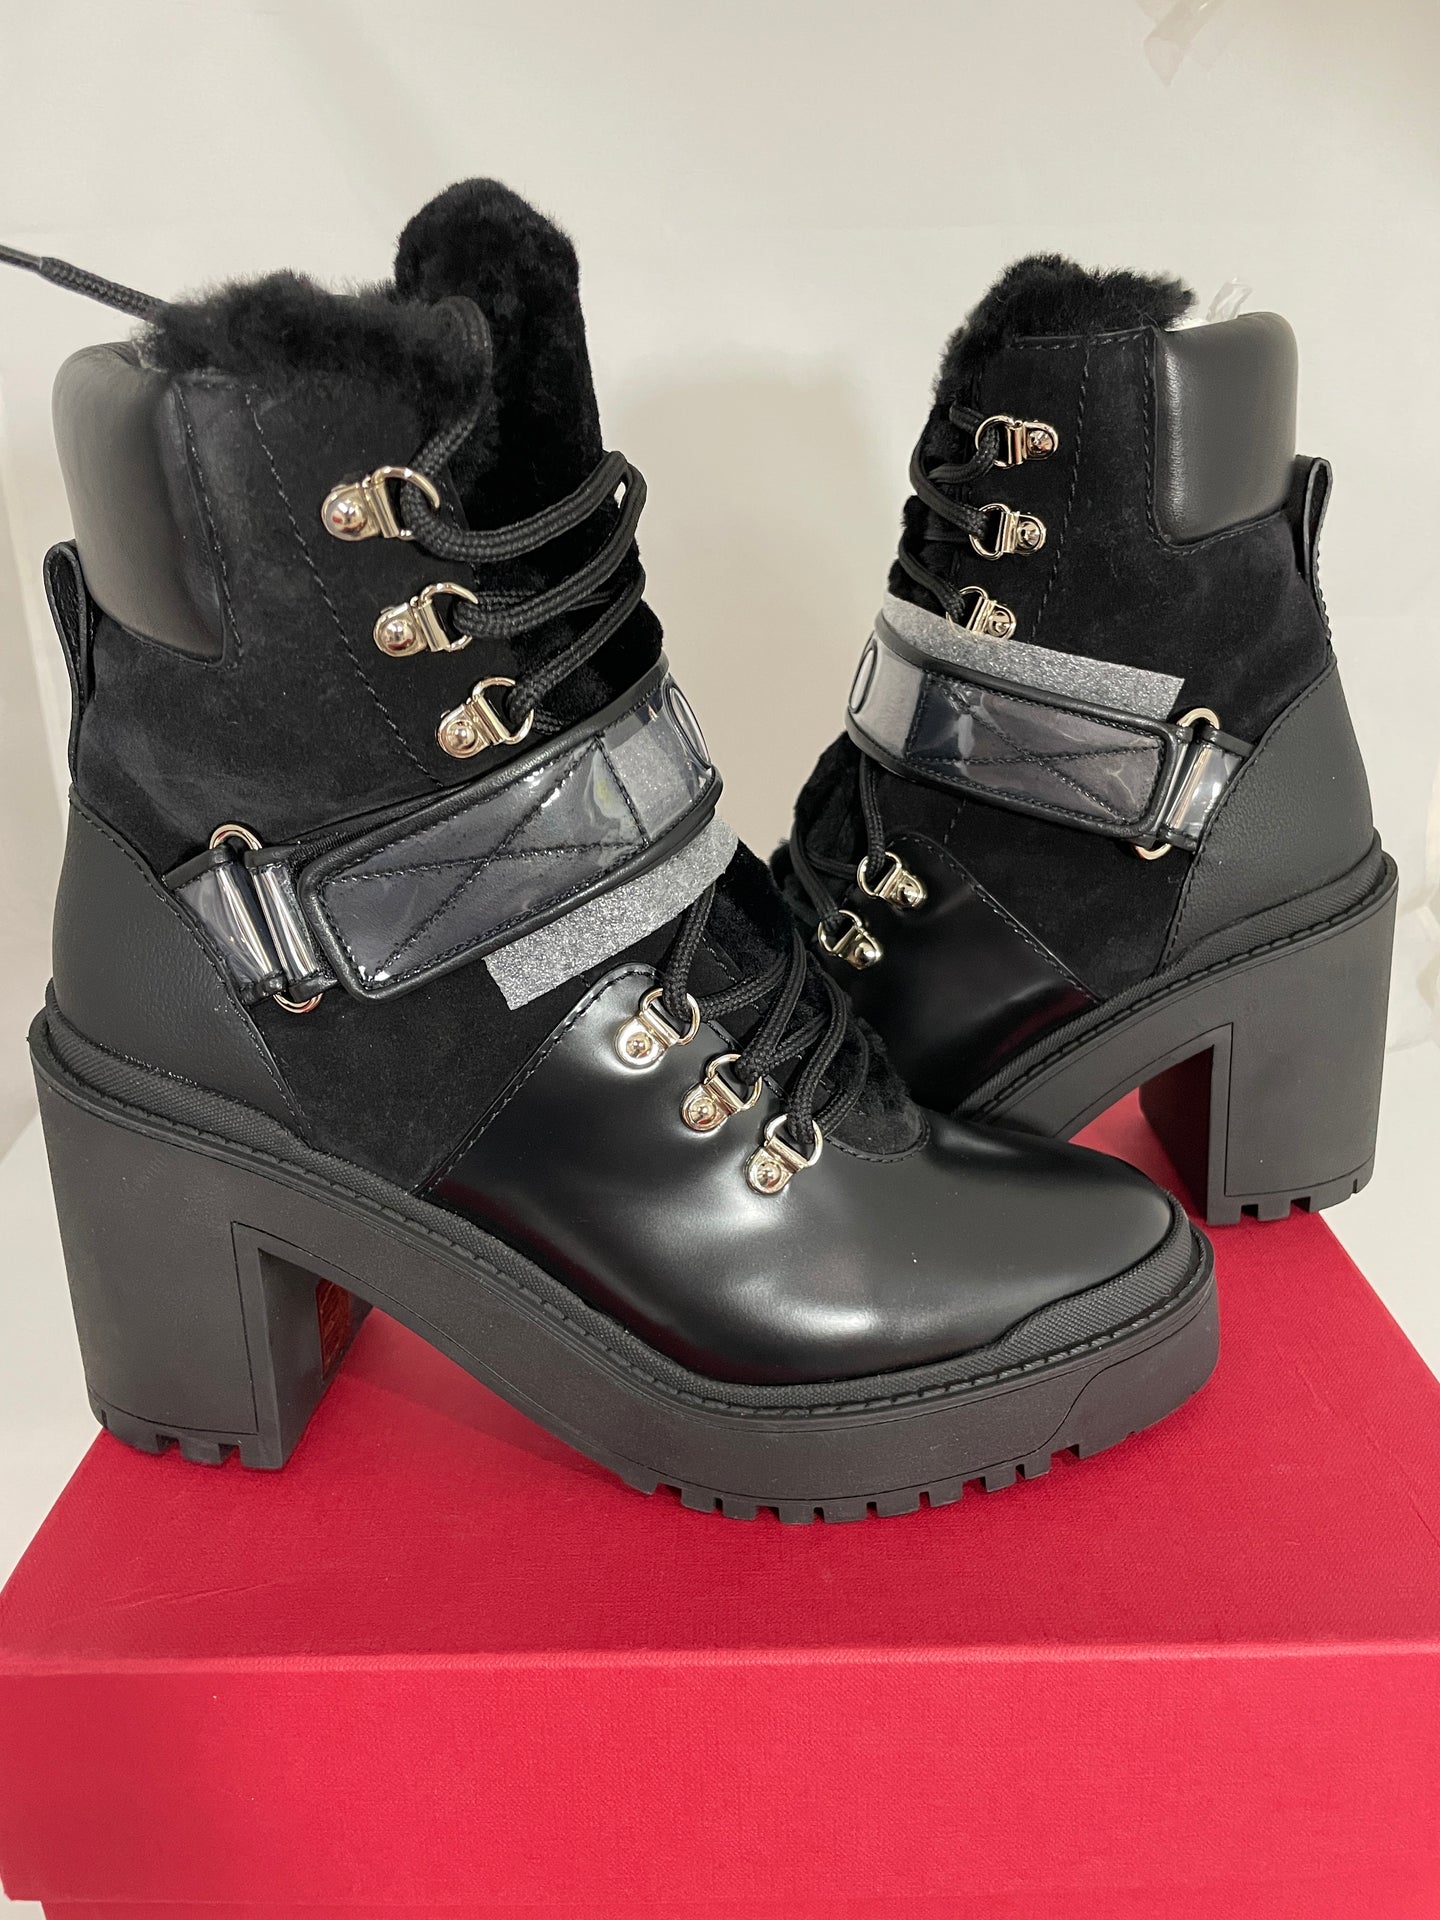 Valentino Rockstud Black Shearling Leather Boots